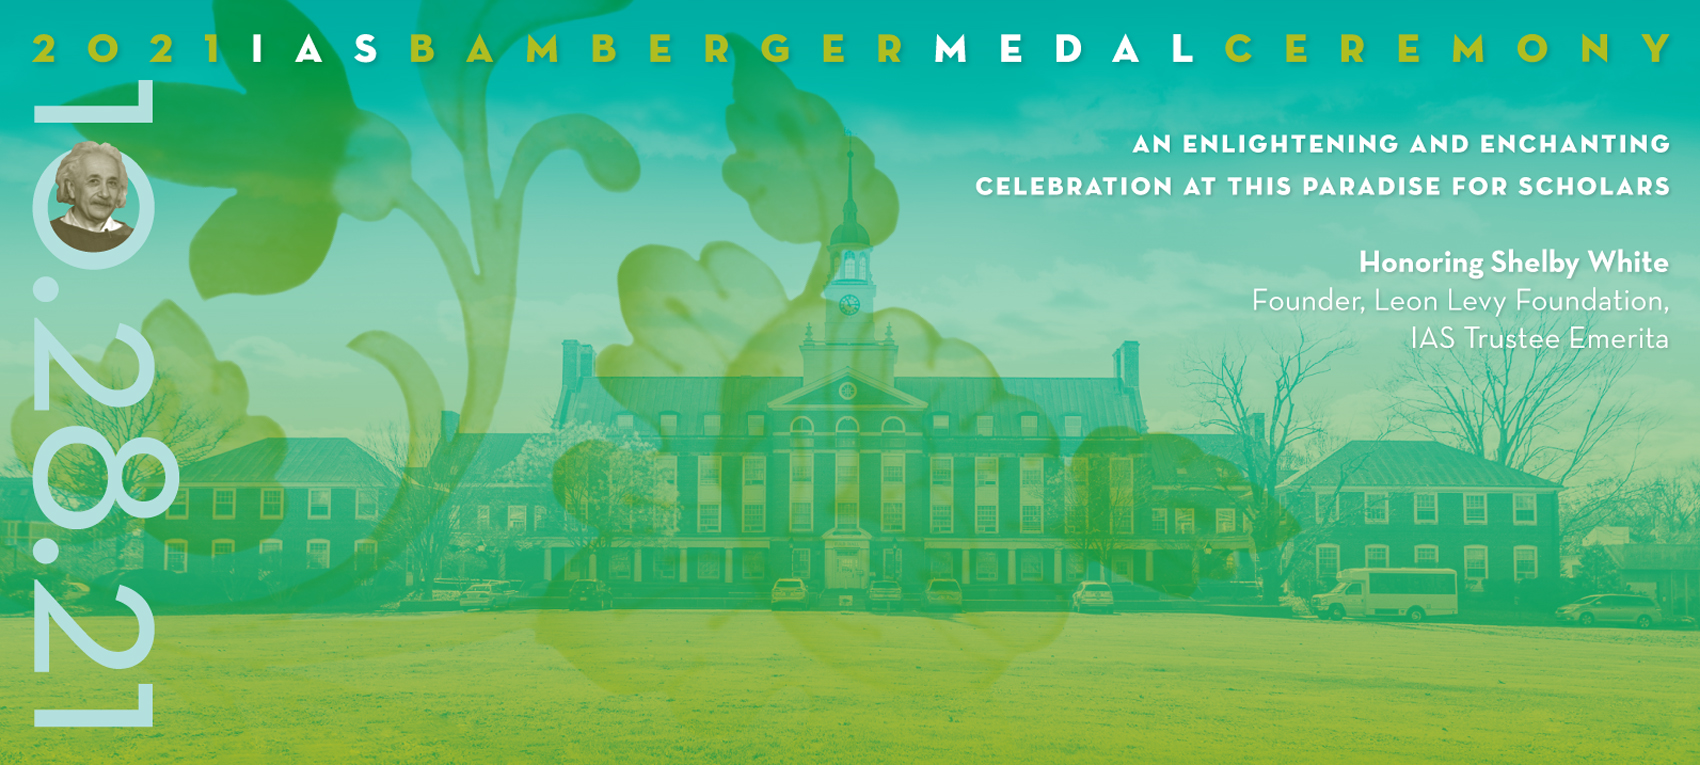 Graphic for IAS Bamberger Medal Ceremony honoring Shelby White